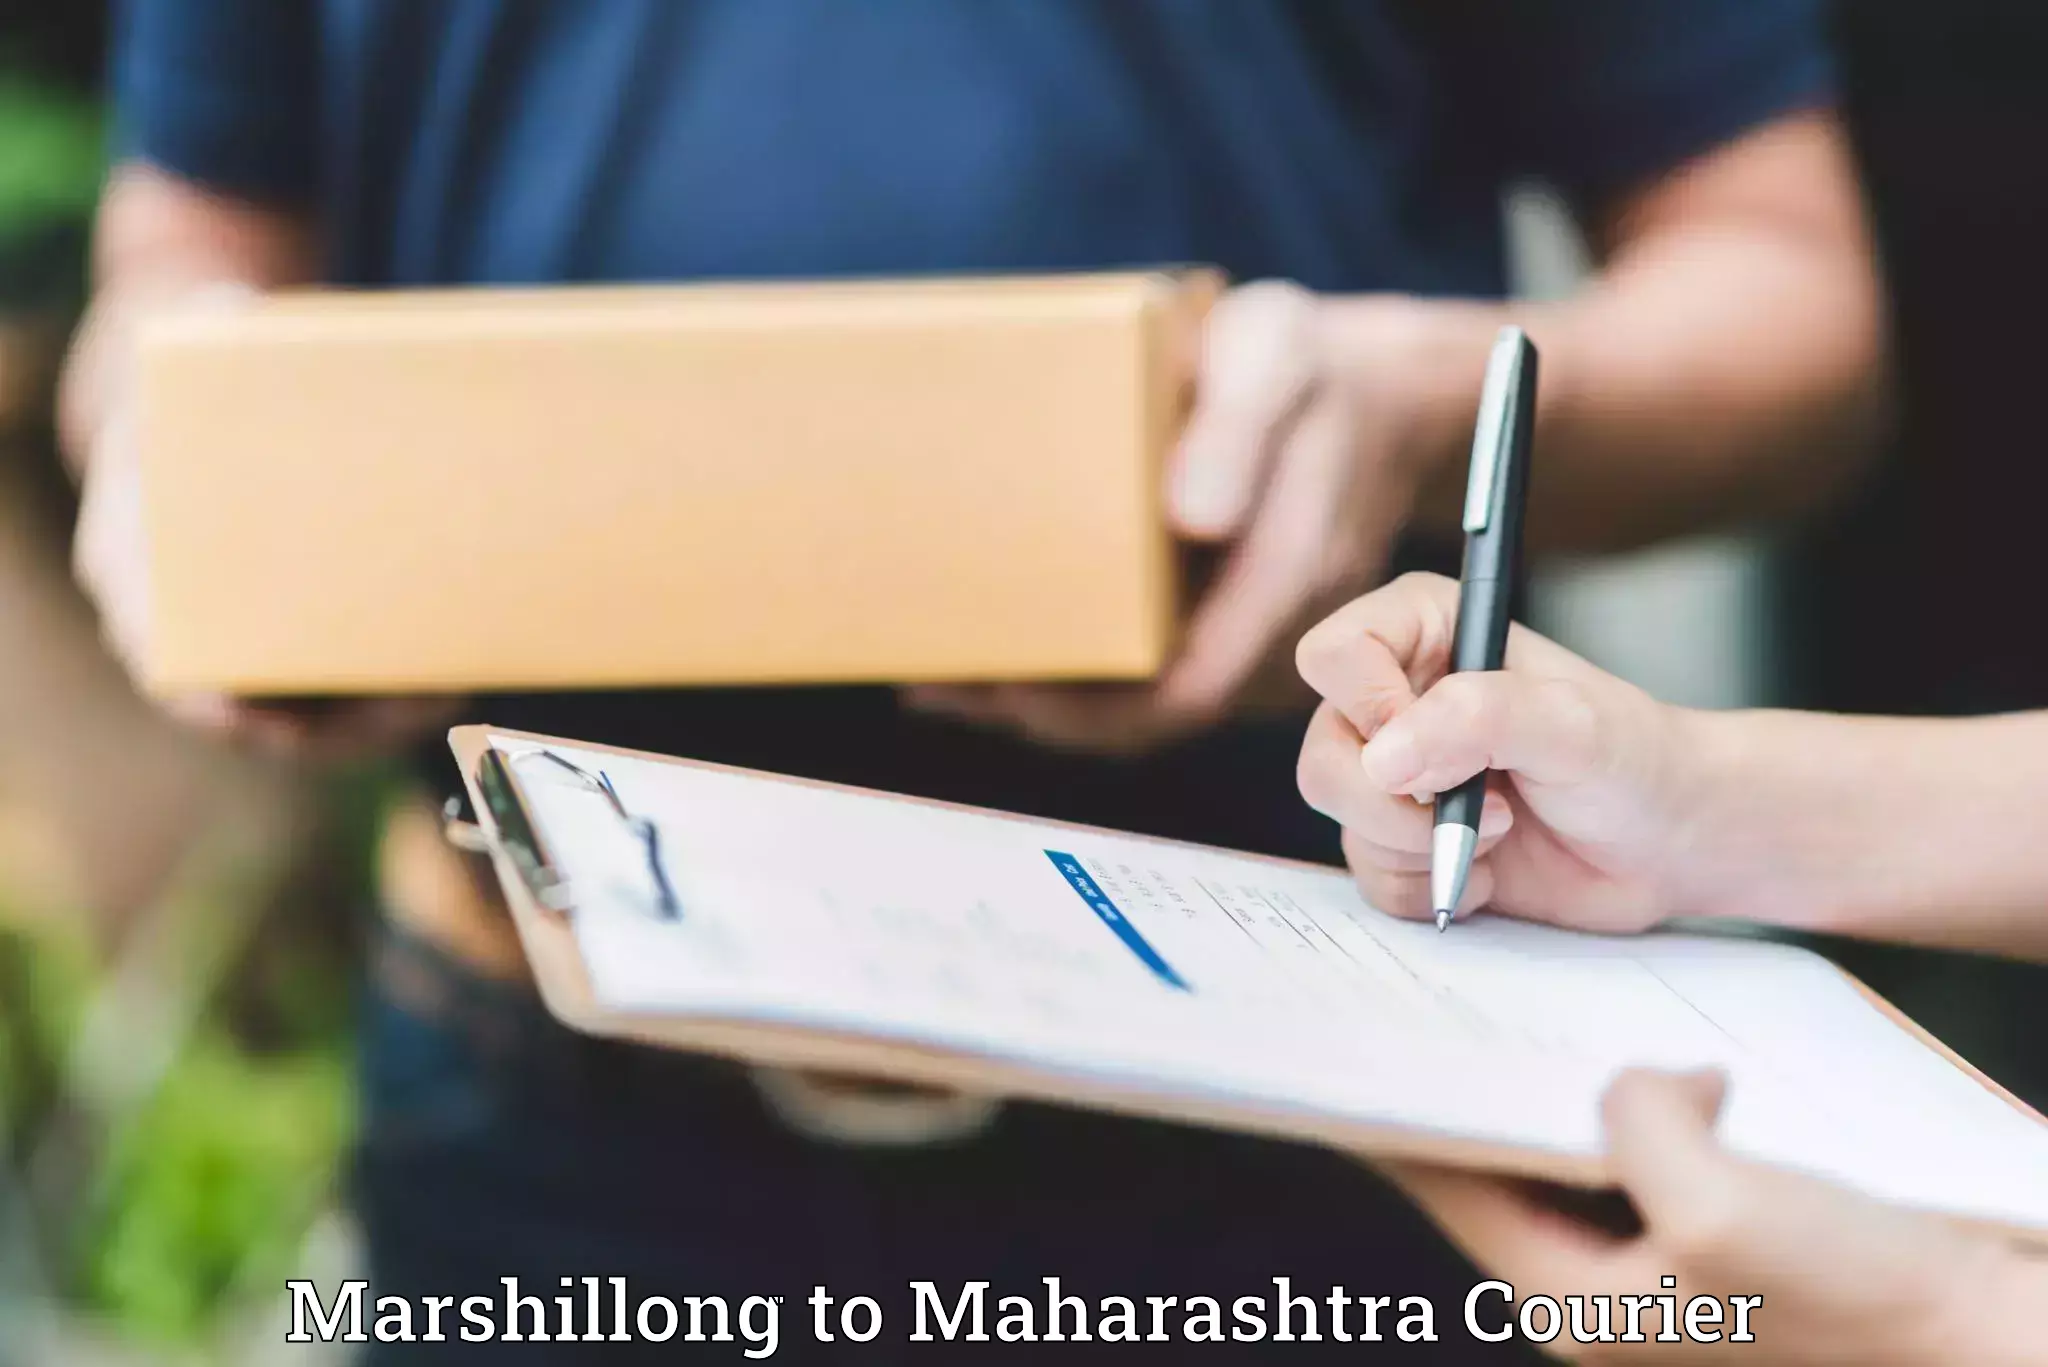 Furniture delivery service Marshillong to Sangamner